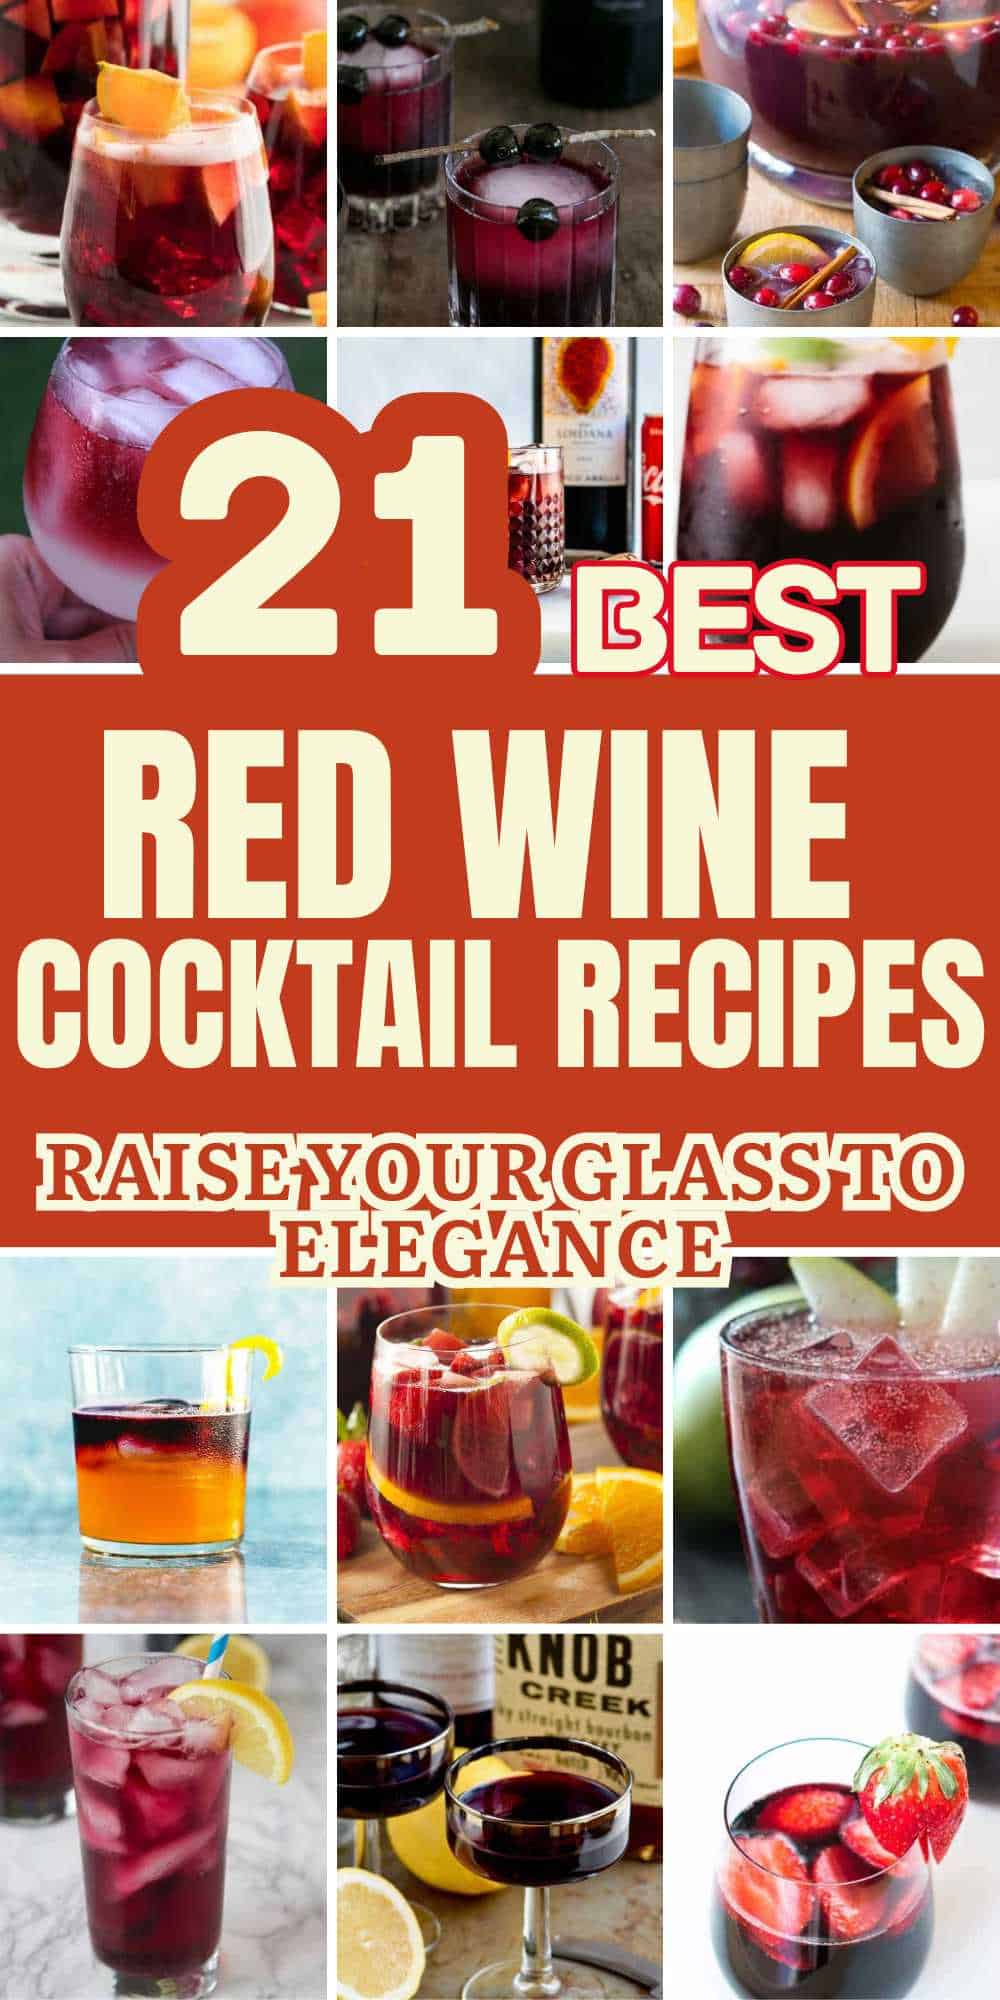 Best Red Wine Cocktail Recipes